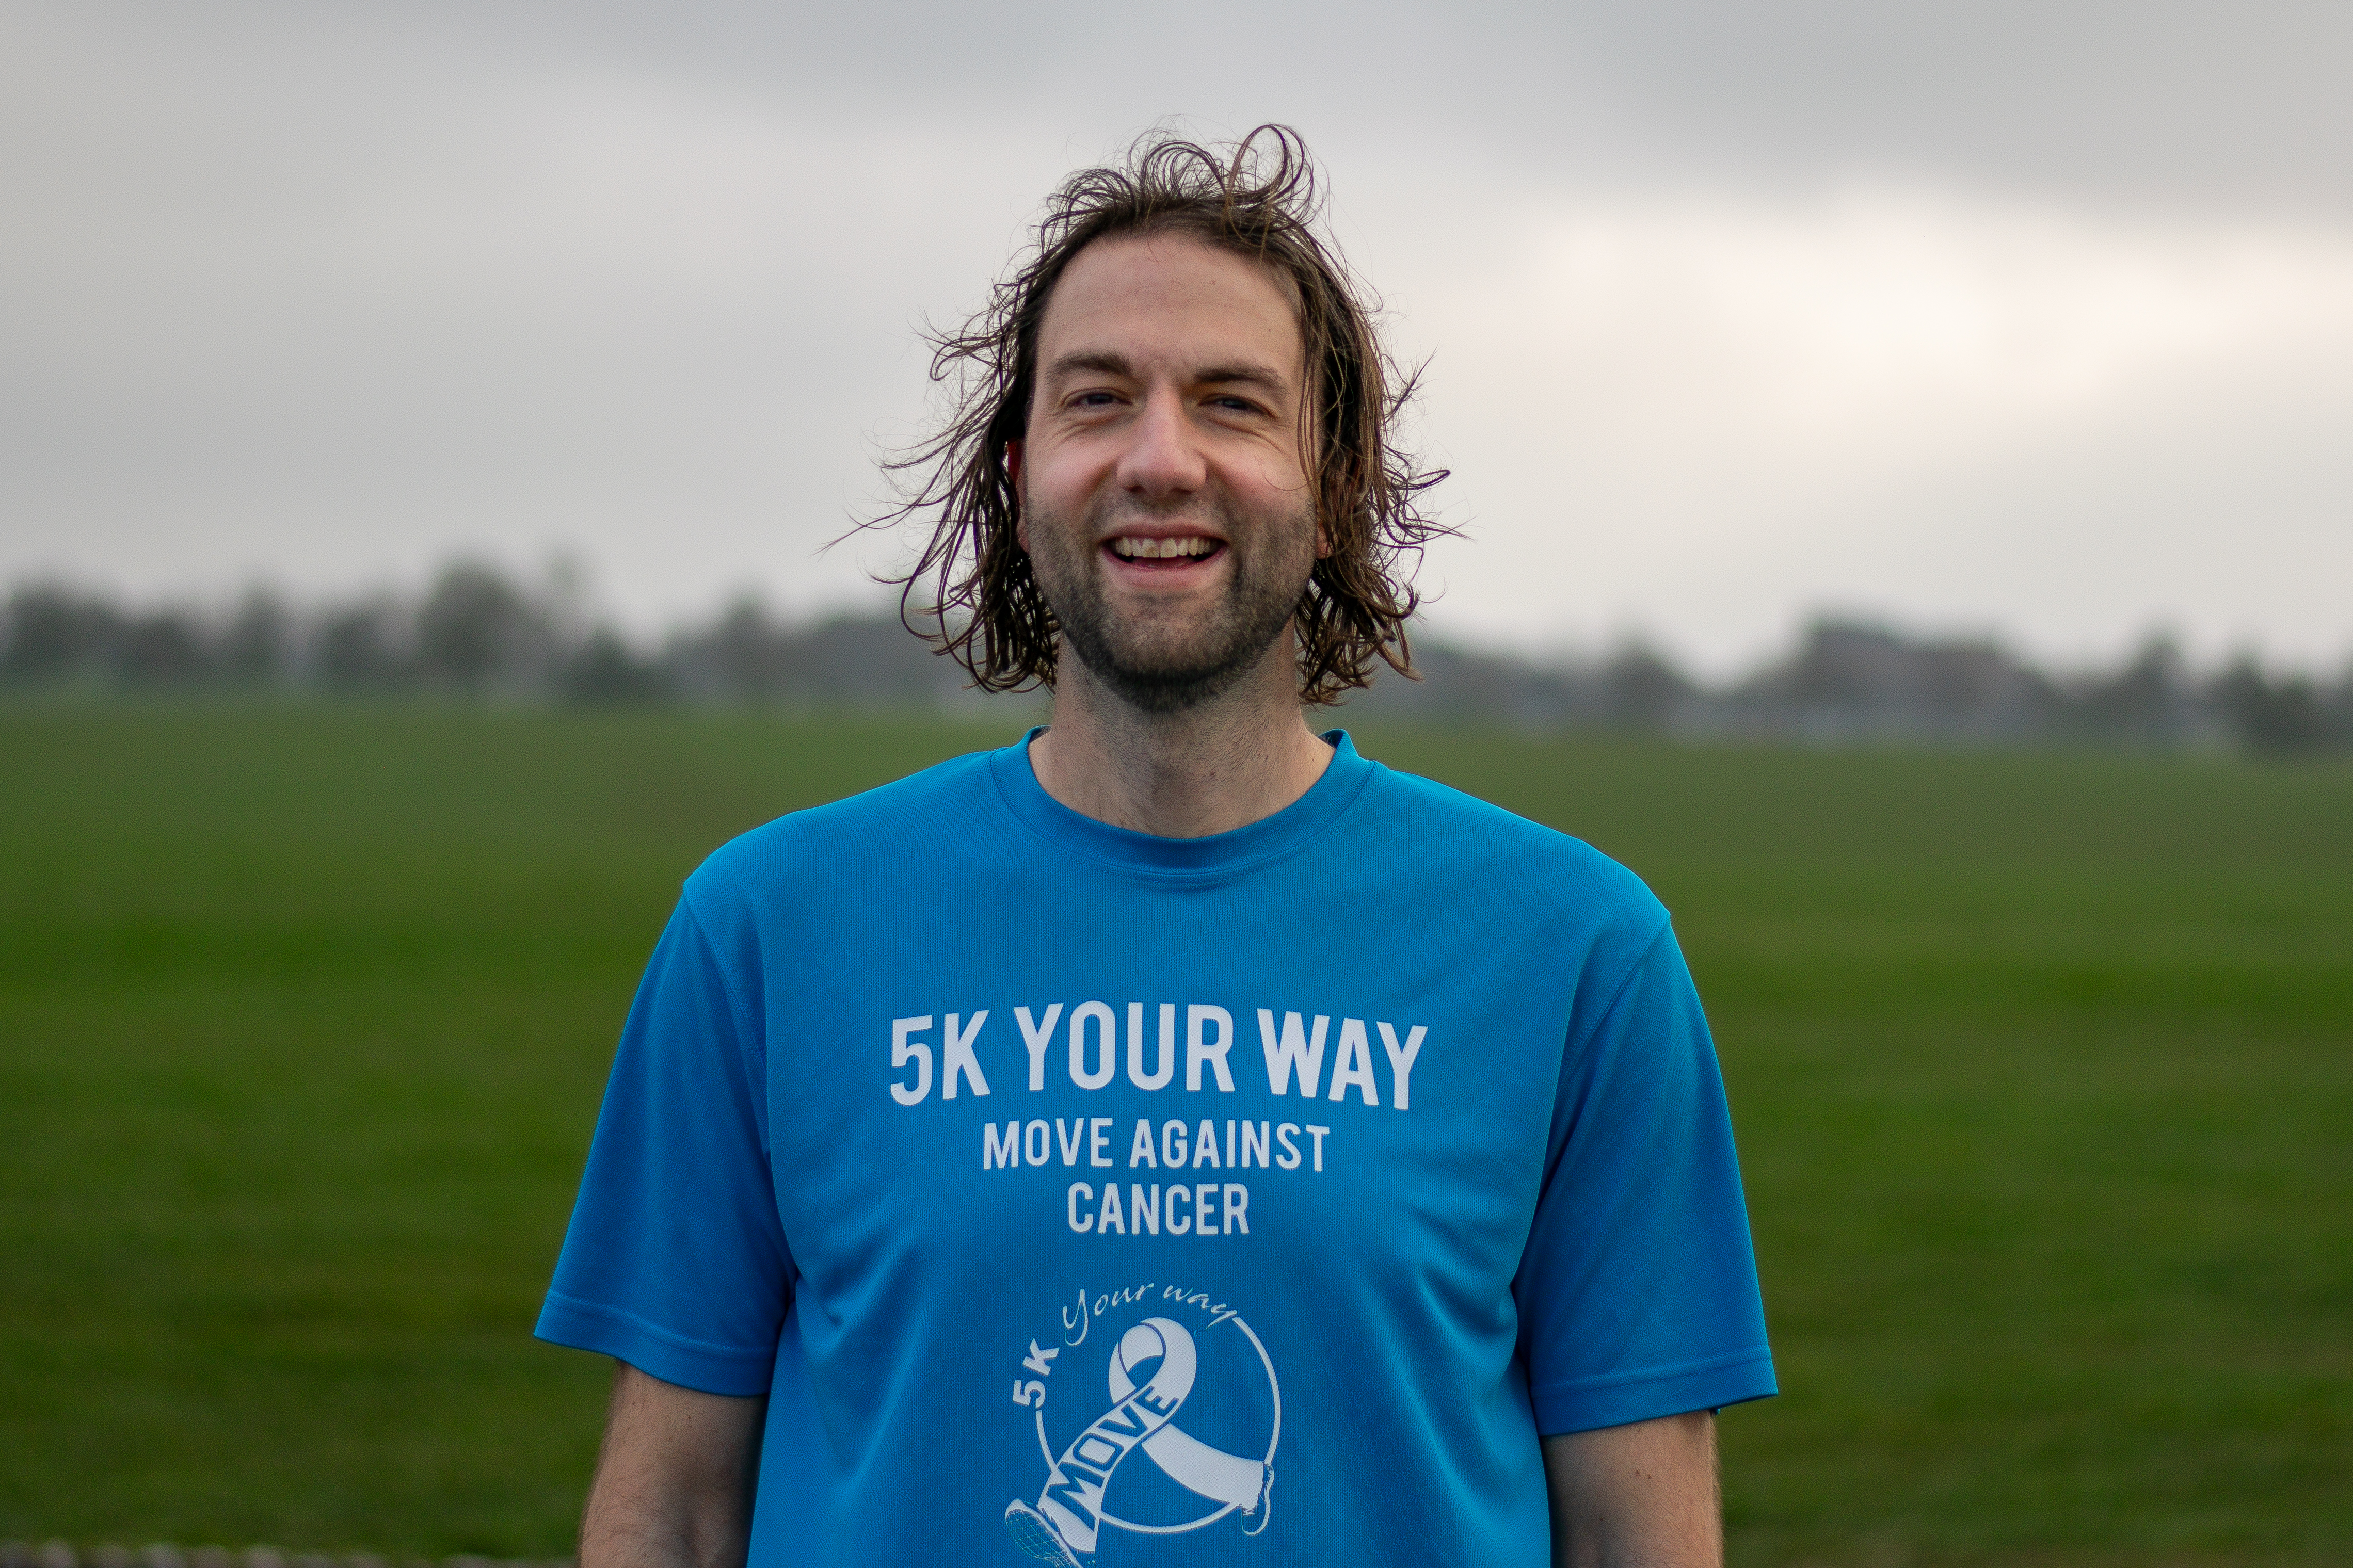 Dr Yani Berdeni, a lecturer who survived stage 4 cancer thanks to a stem cell transplant, is running the London Marathon to help others in need (University of Bristol/PA) 